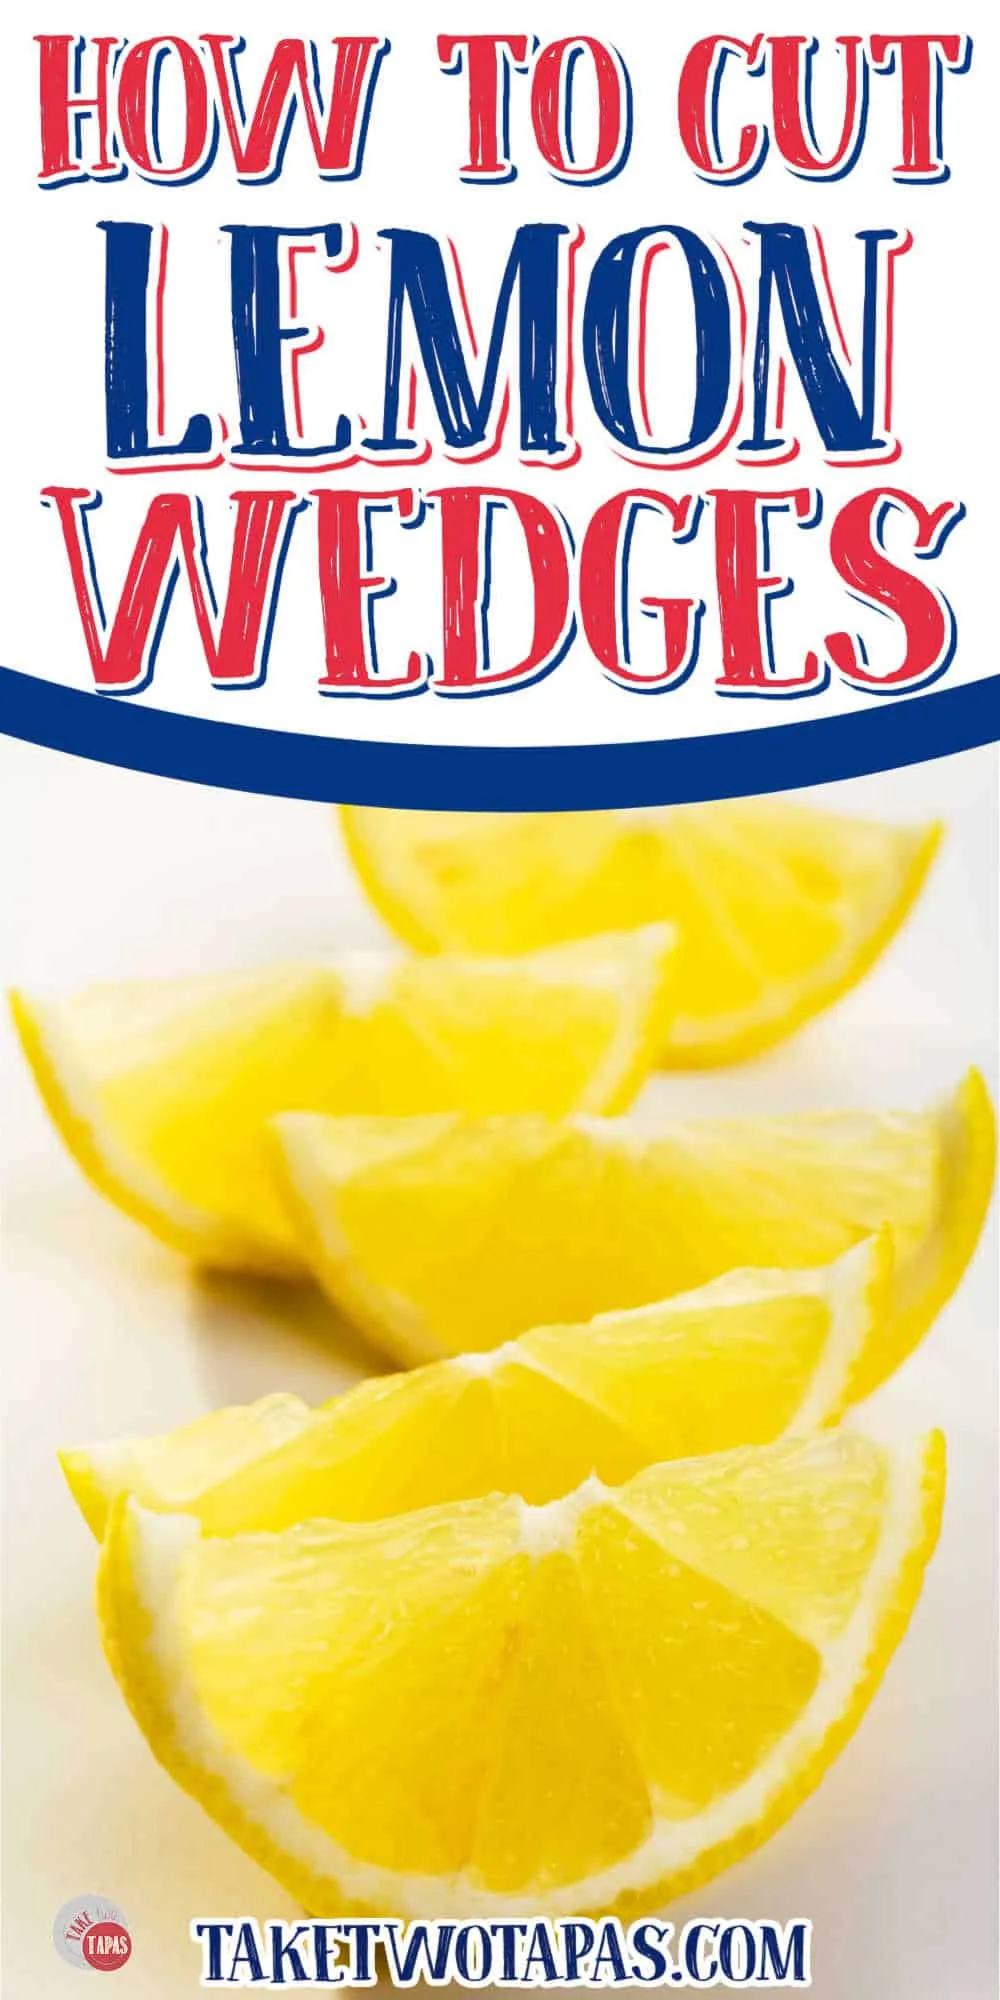 lemon wedges and text